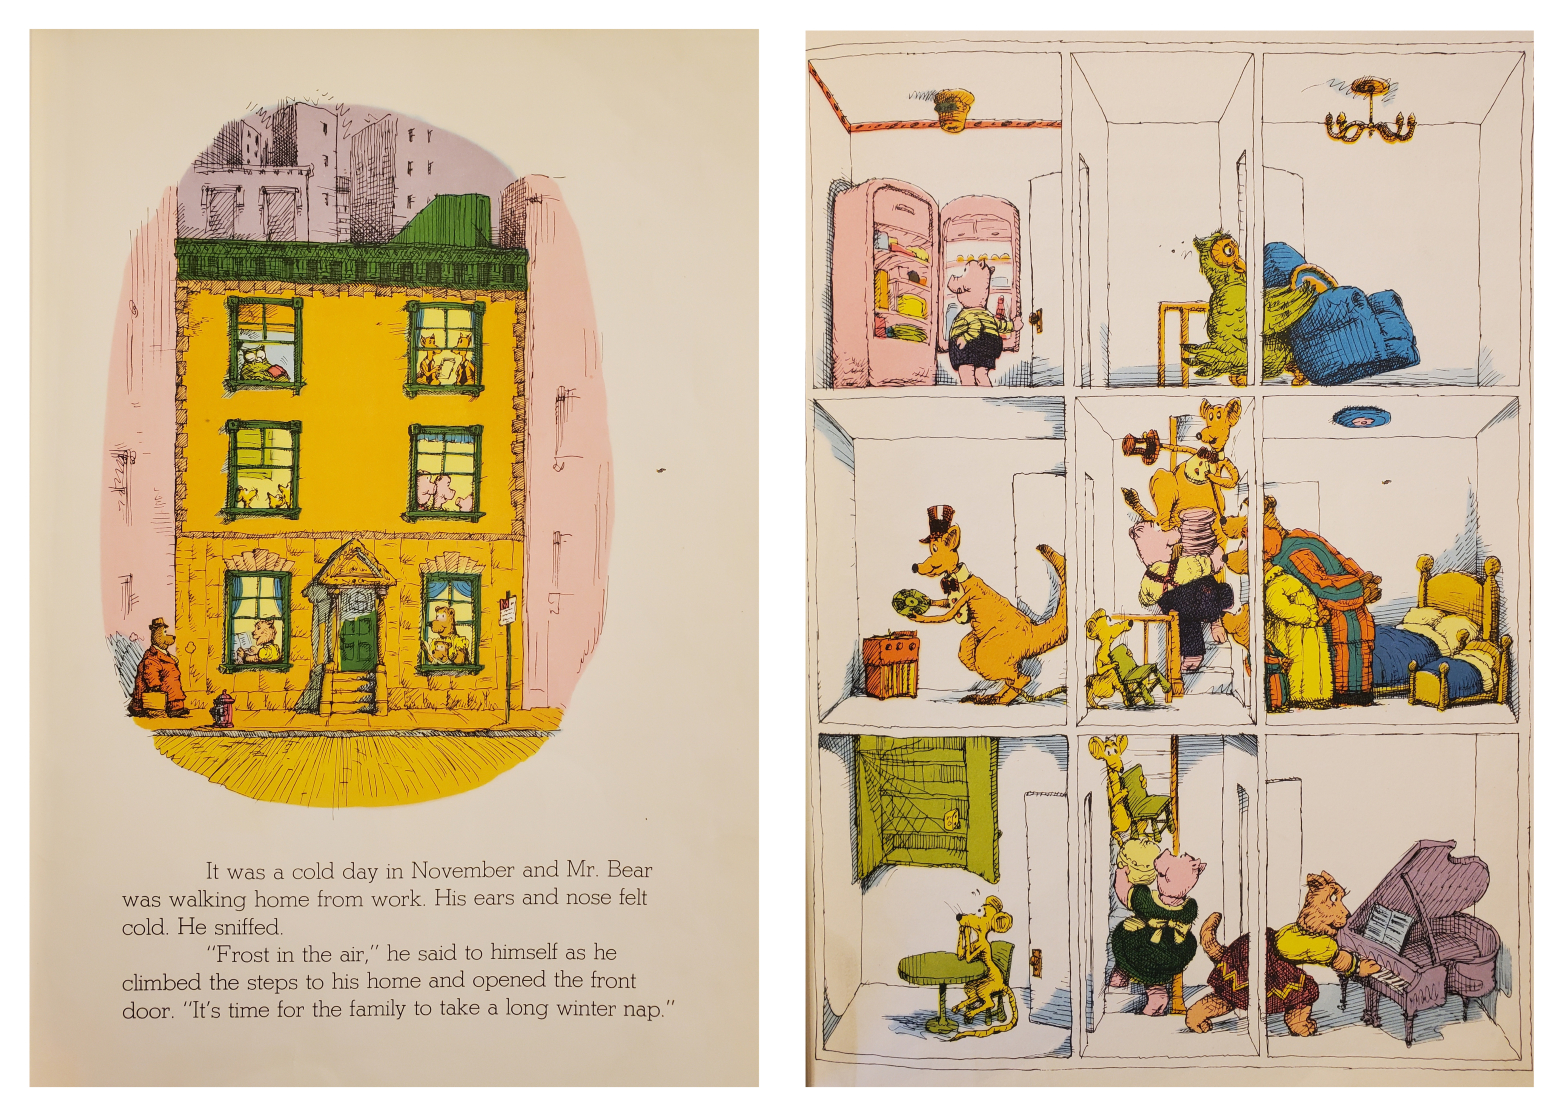 The Brownstone interior pages